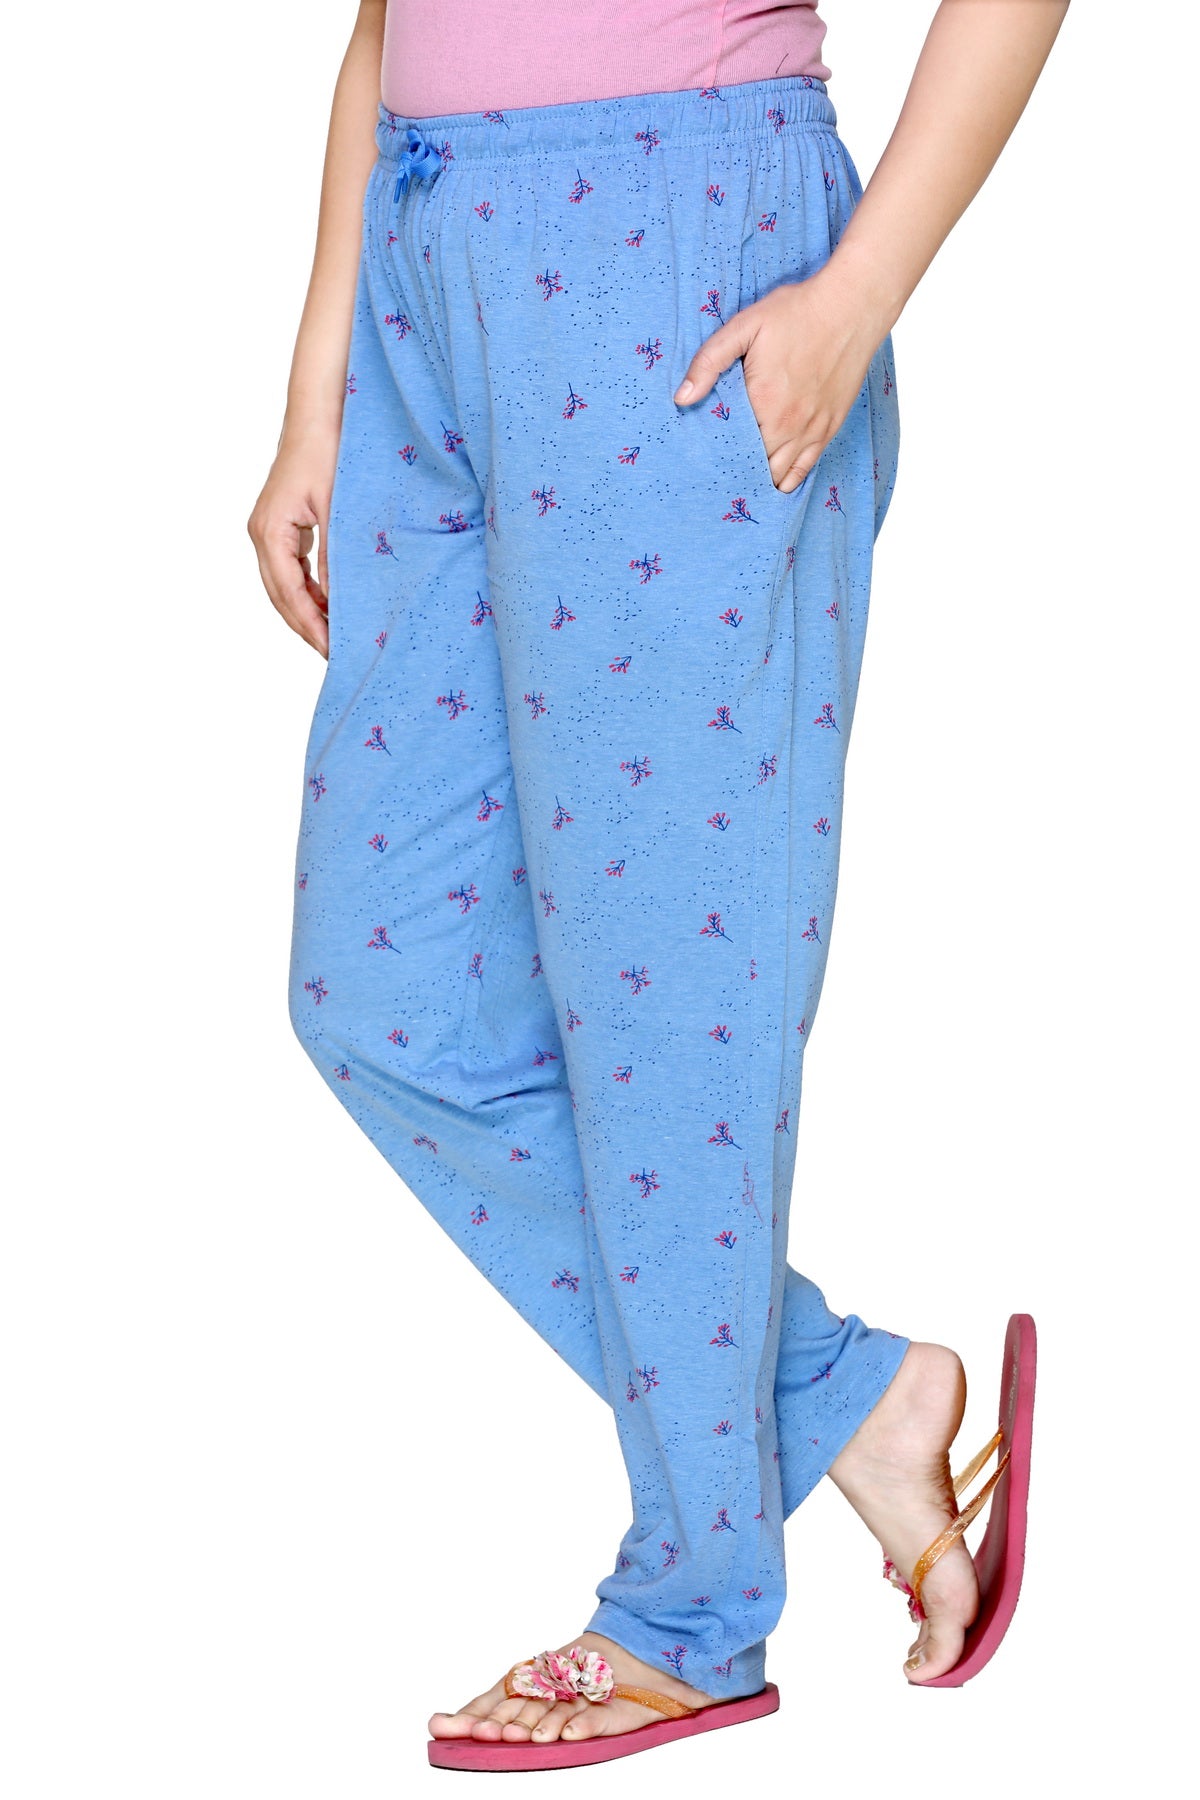 Buy Blue Cotton Slub Solid Women Pant for Best Price, Reviews, Free Shipping